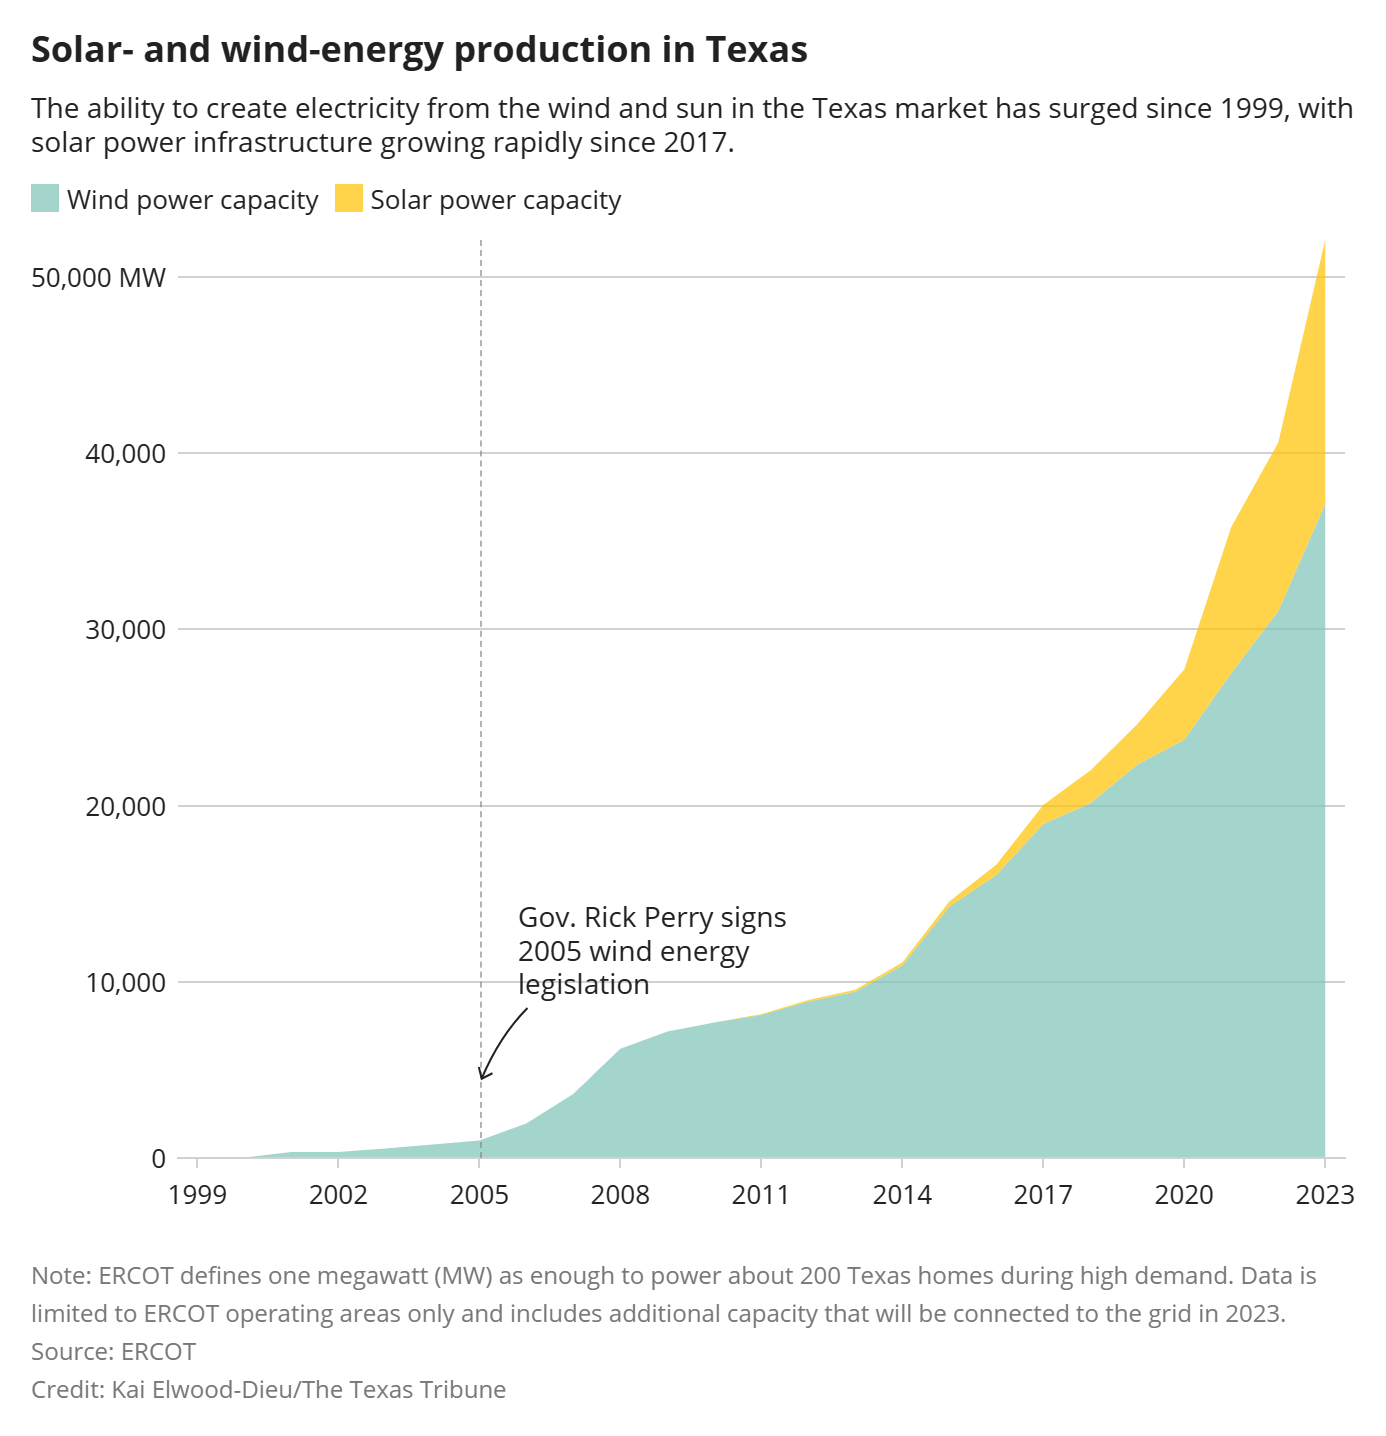 Solar- and wind-energy production in Texas, 1999-2023. Wind and solar energy production by county in Texas. The ability to create electricity from the wind and sun in the Texas market has surged since 1999, with solar power infrastructure growing rapidly since 2017. Data: ERCOT. Graphic: Kai Elwood-Dieu / The Texas Tribune